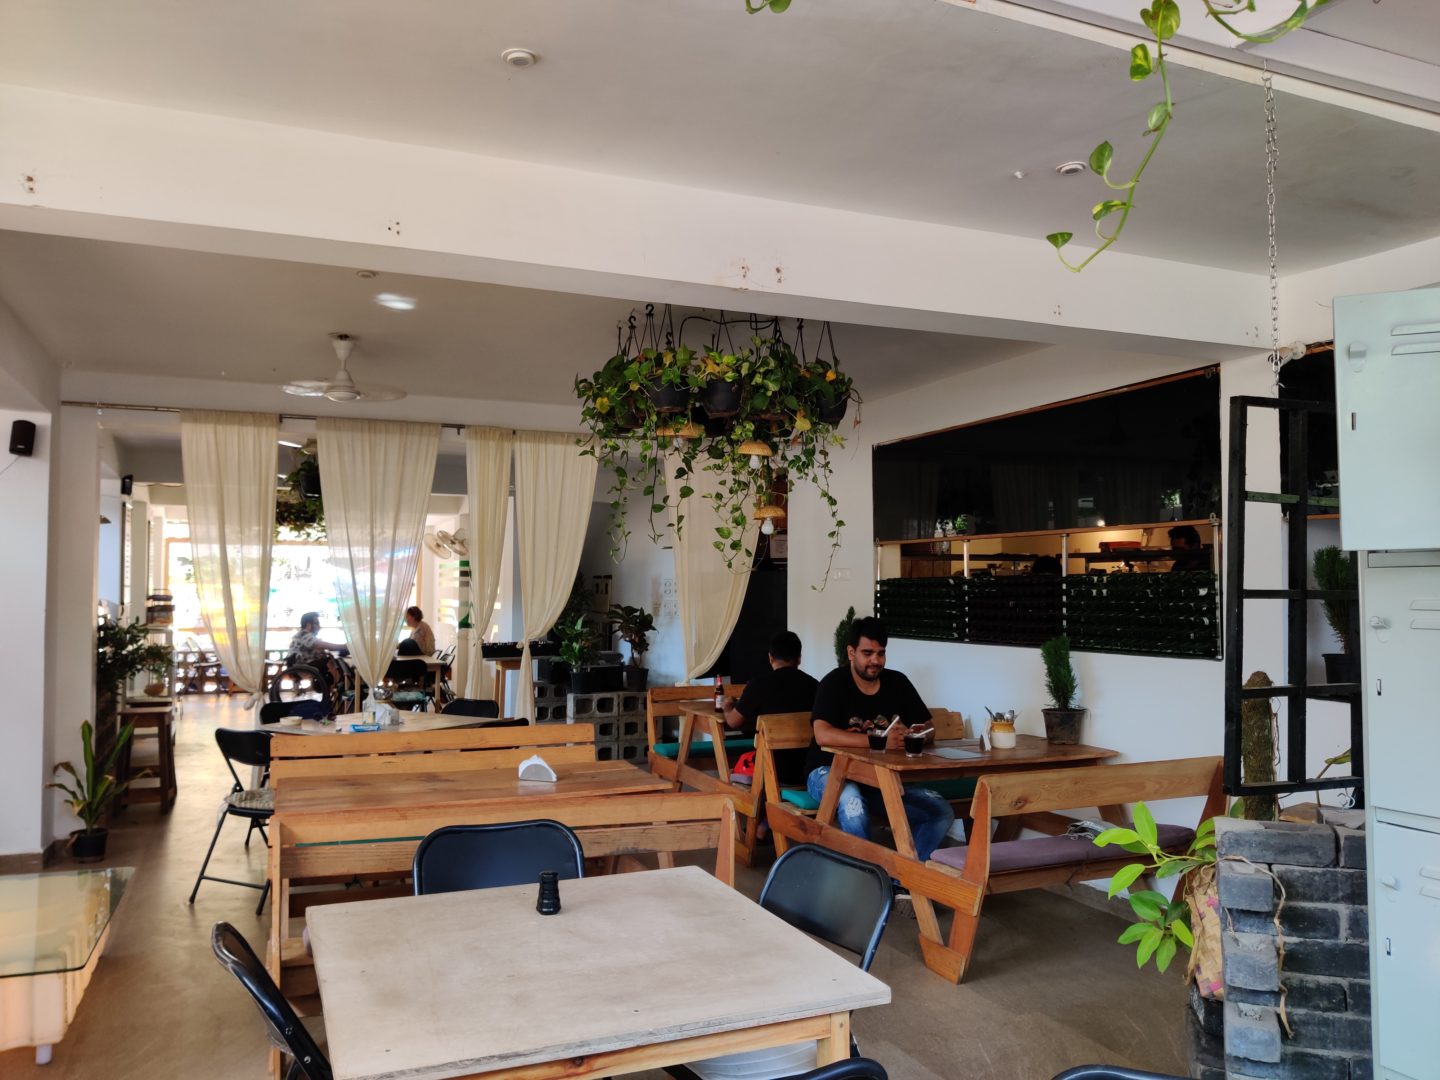 Rasa Bistro, Palolem – A Co-Working Cafe Serving India-Inspired Fare